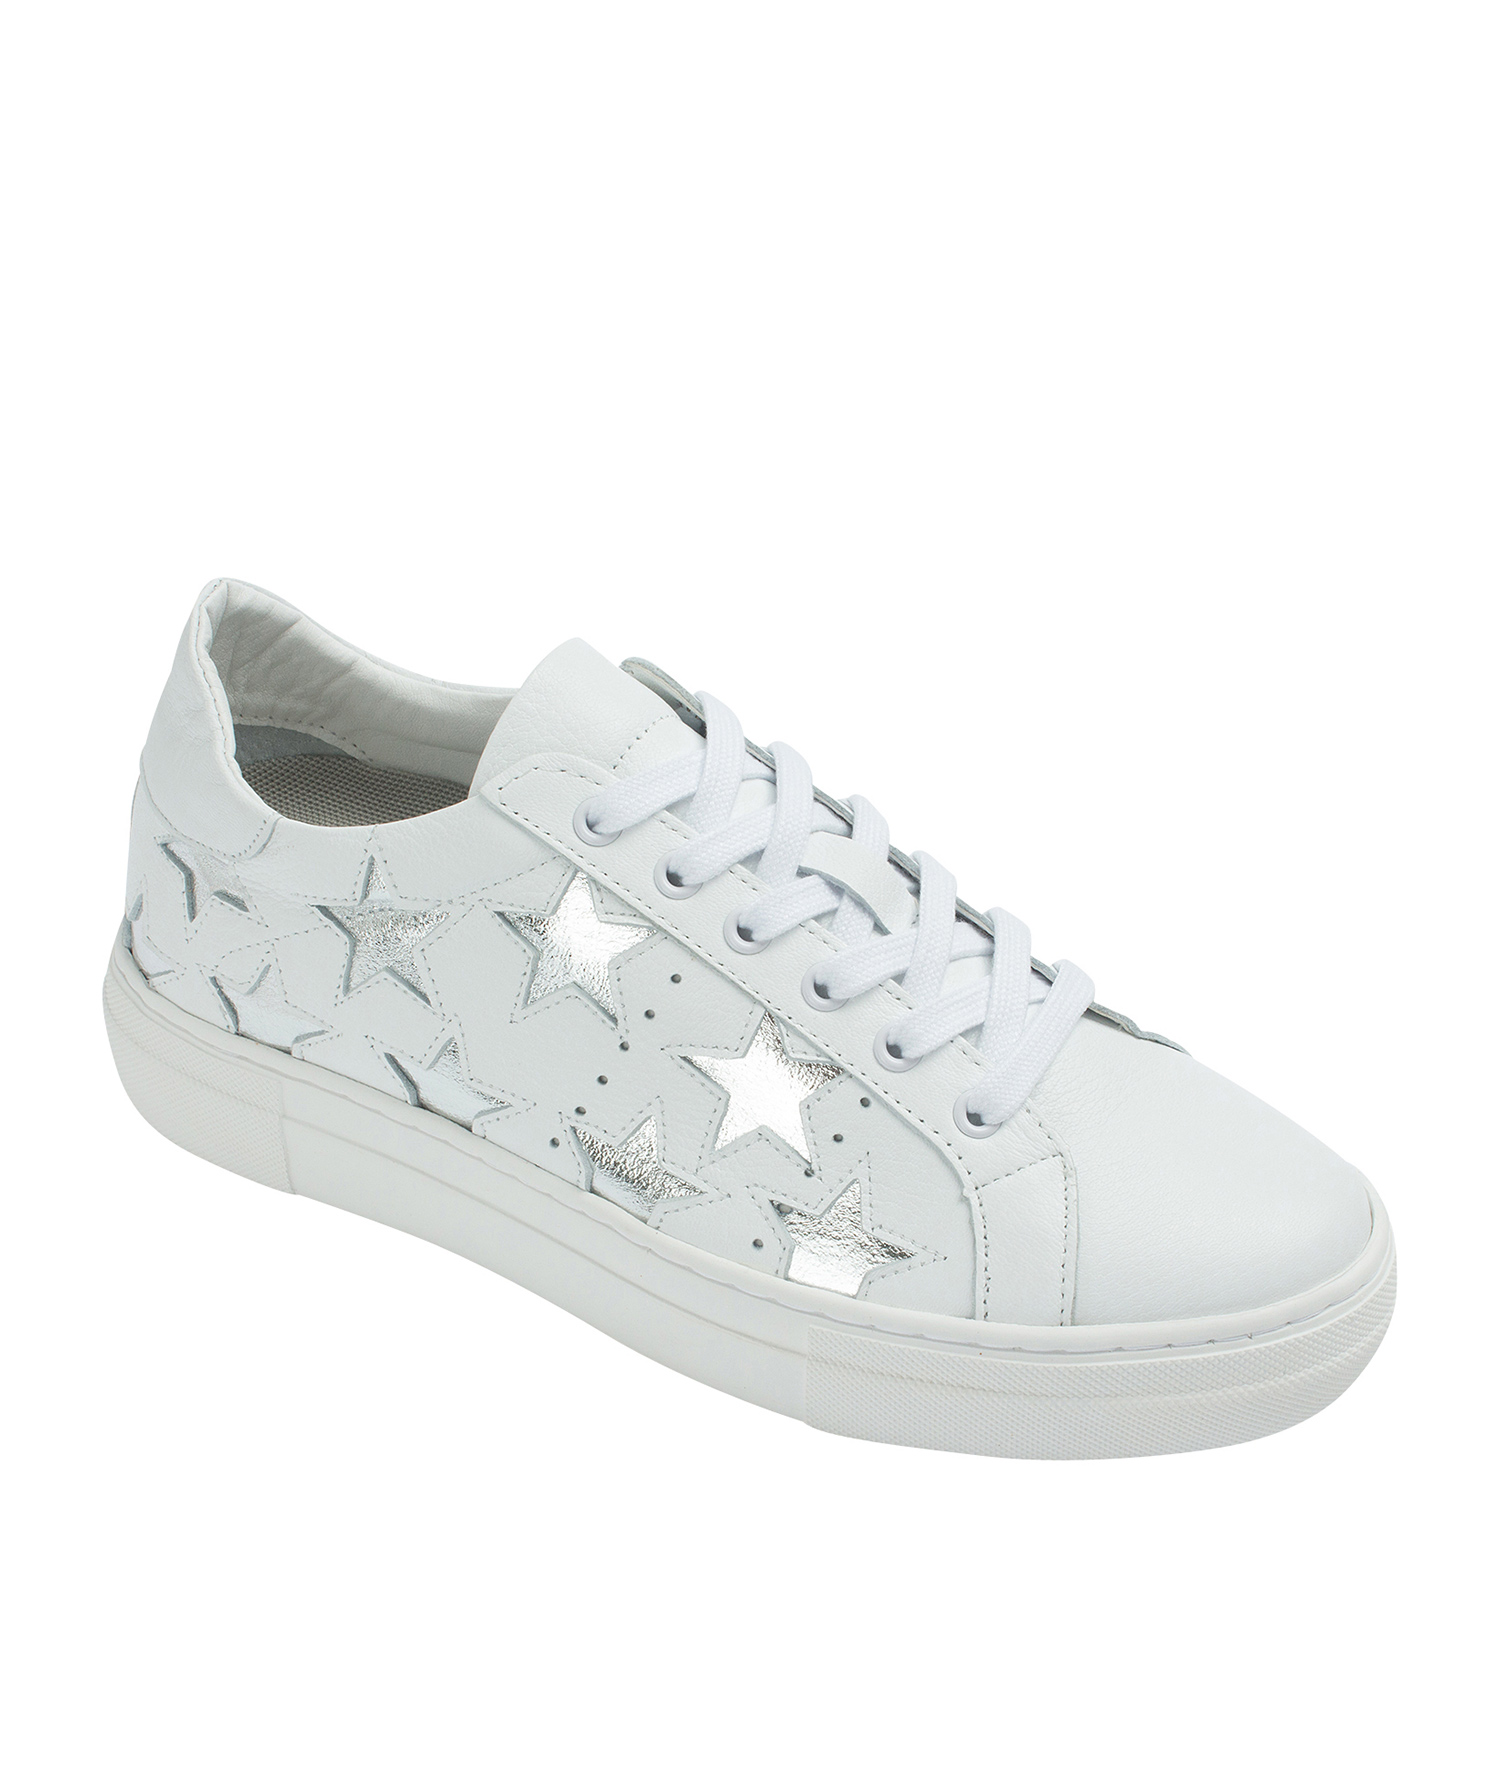 white shoe with star